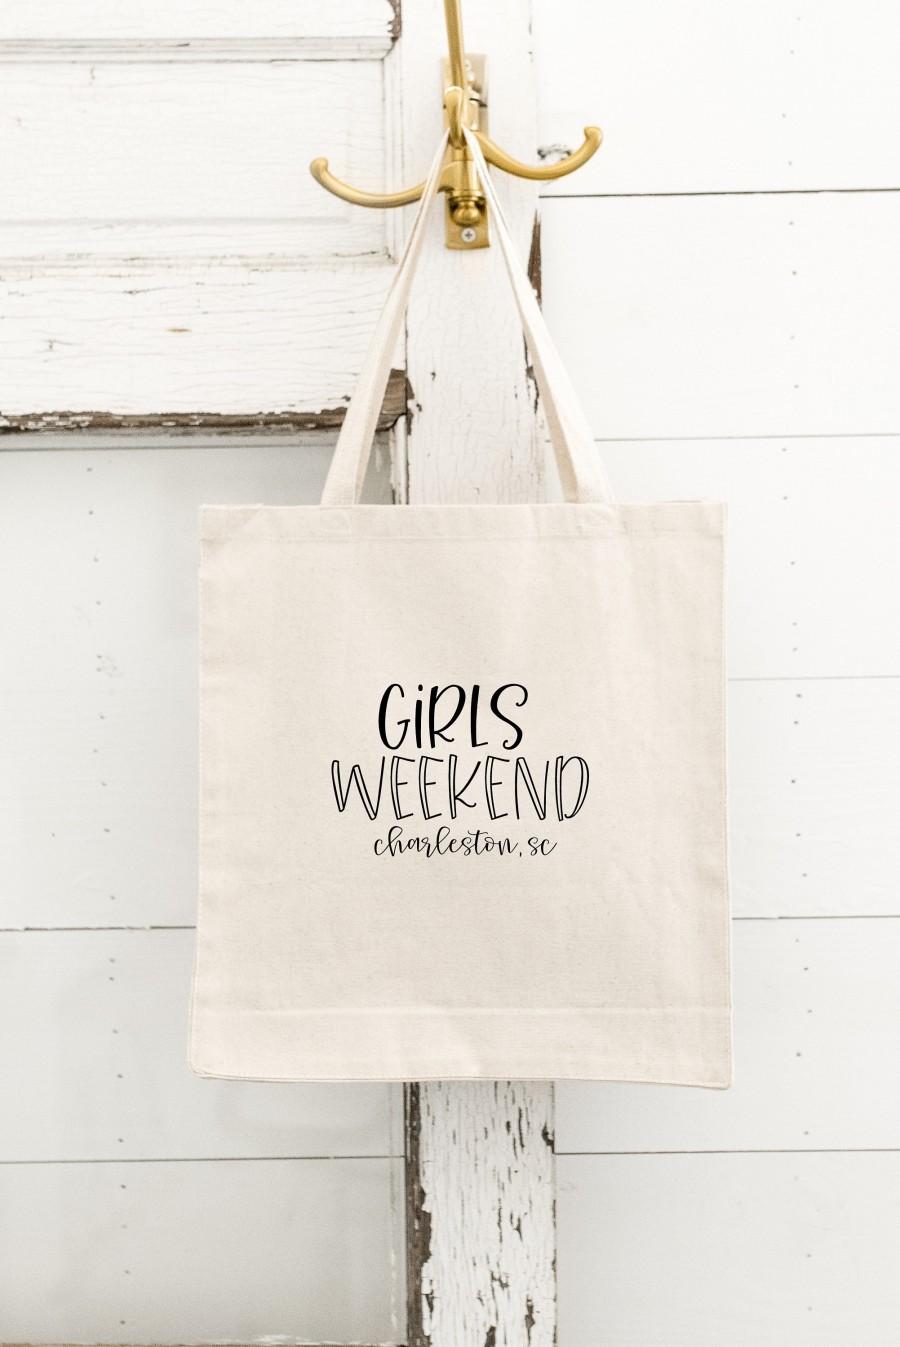 Wedding - Girls Weekend Tote with Location - Girls Wknd - Weekend Tote - Girls Getaway - Girls Trip - Gift - Tote Bag - Weekend Trip - Girls Weekend